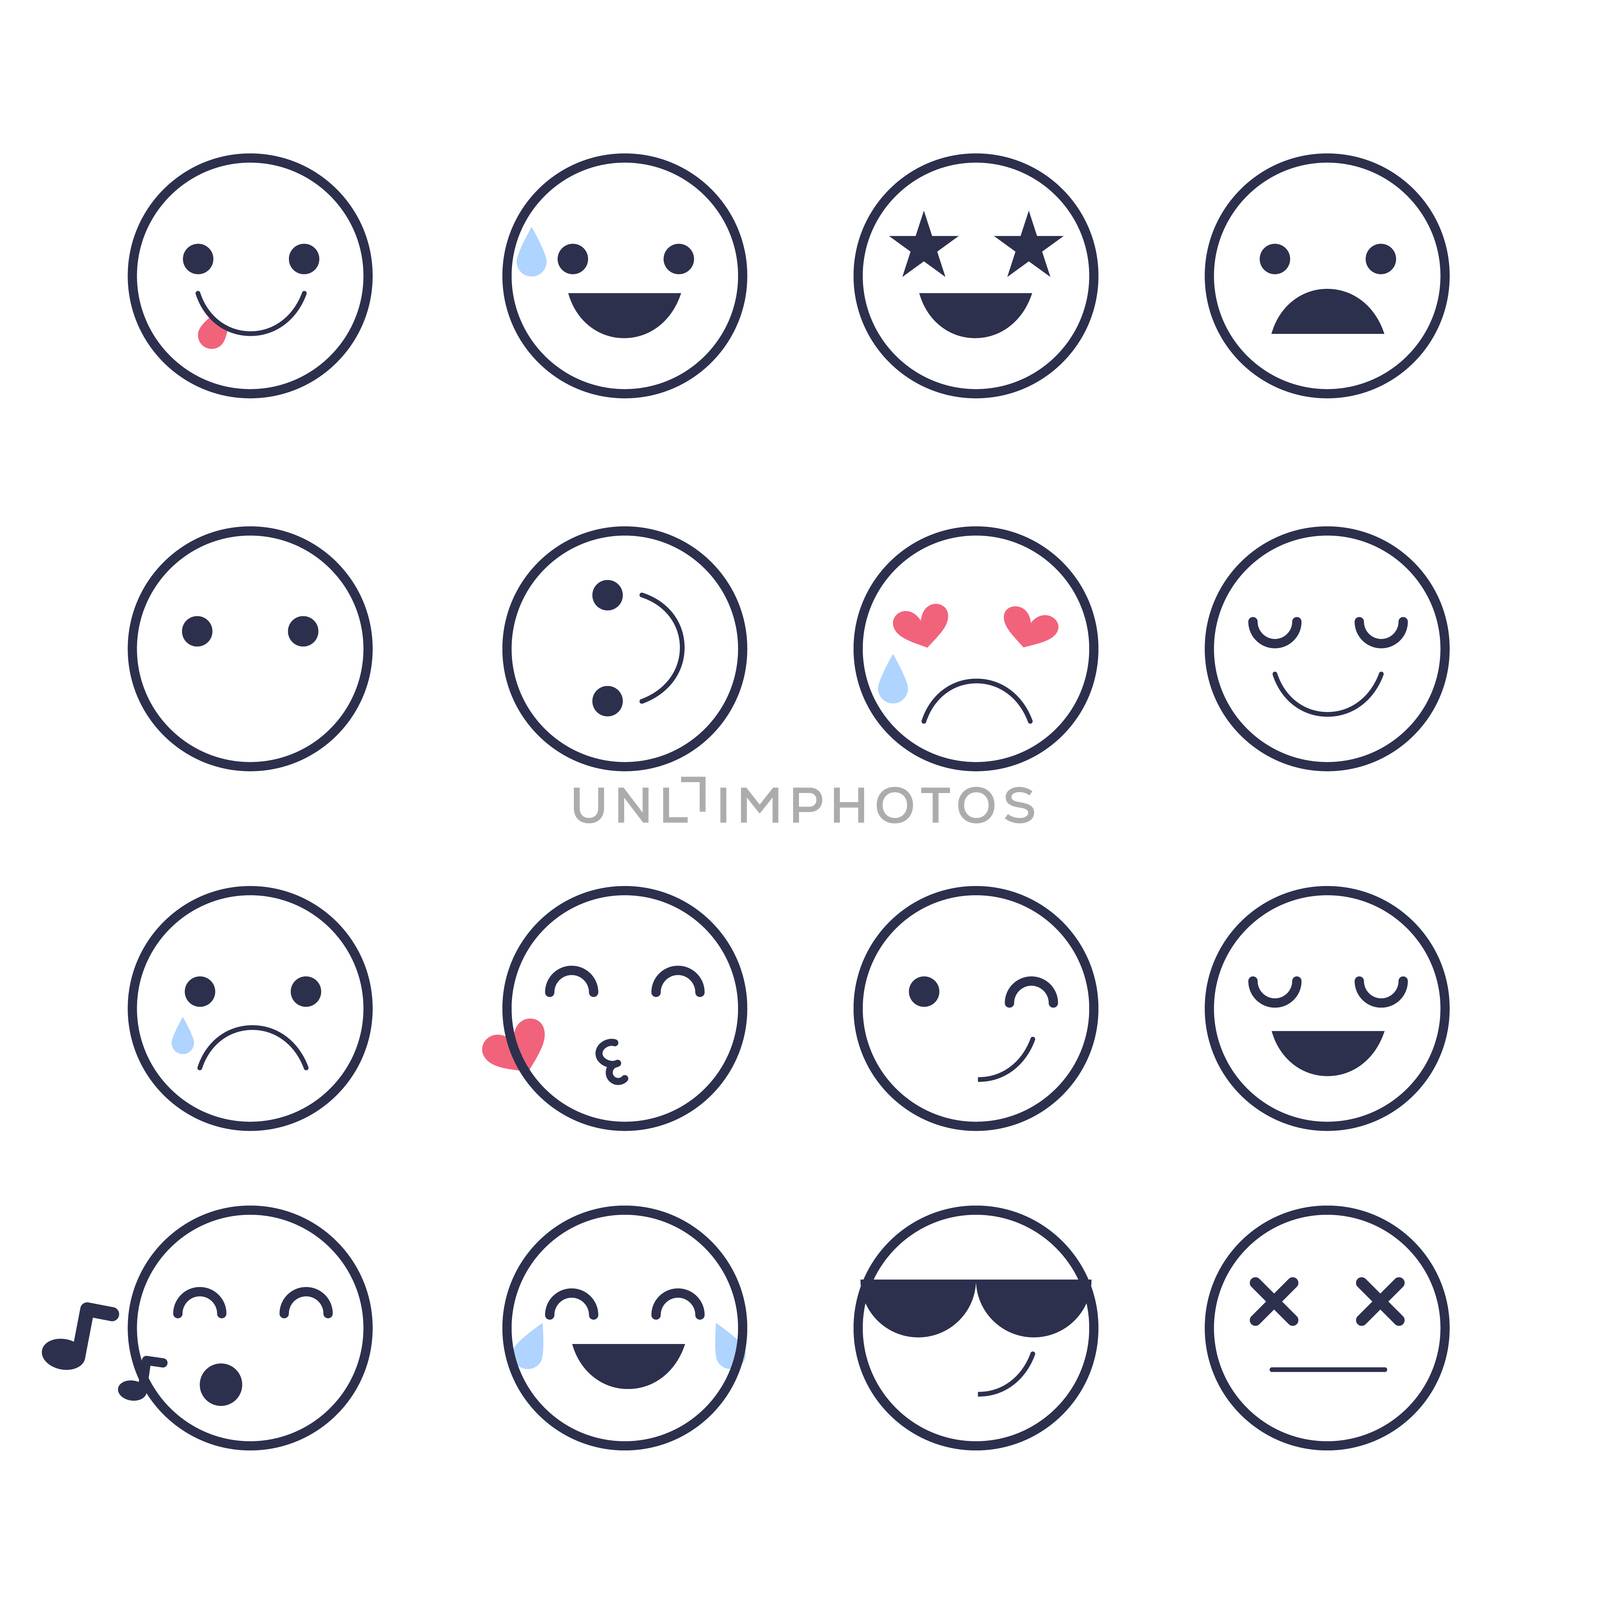 Set emotions icons for applications and chat. Emoticons with different emotions isolated on white background. by Elena_Garder